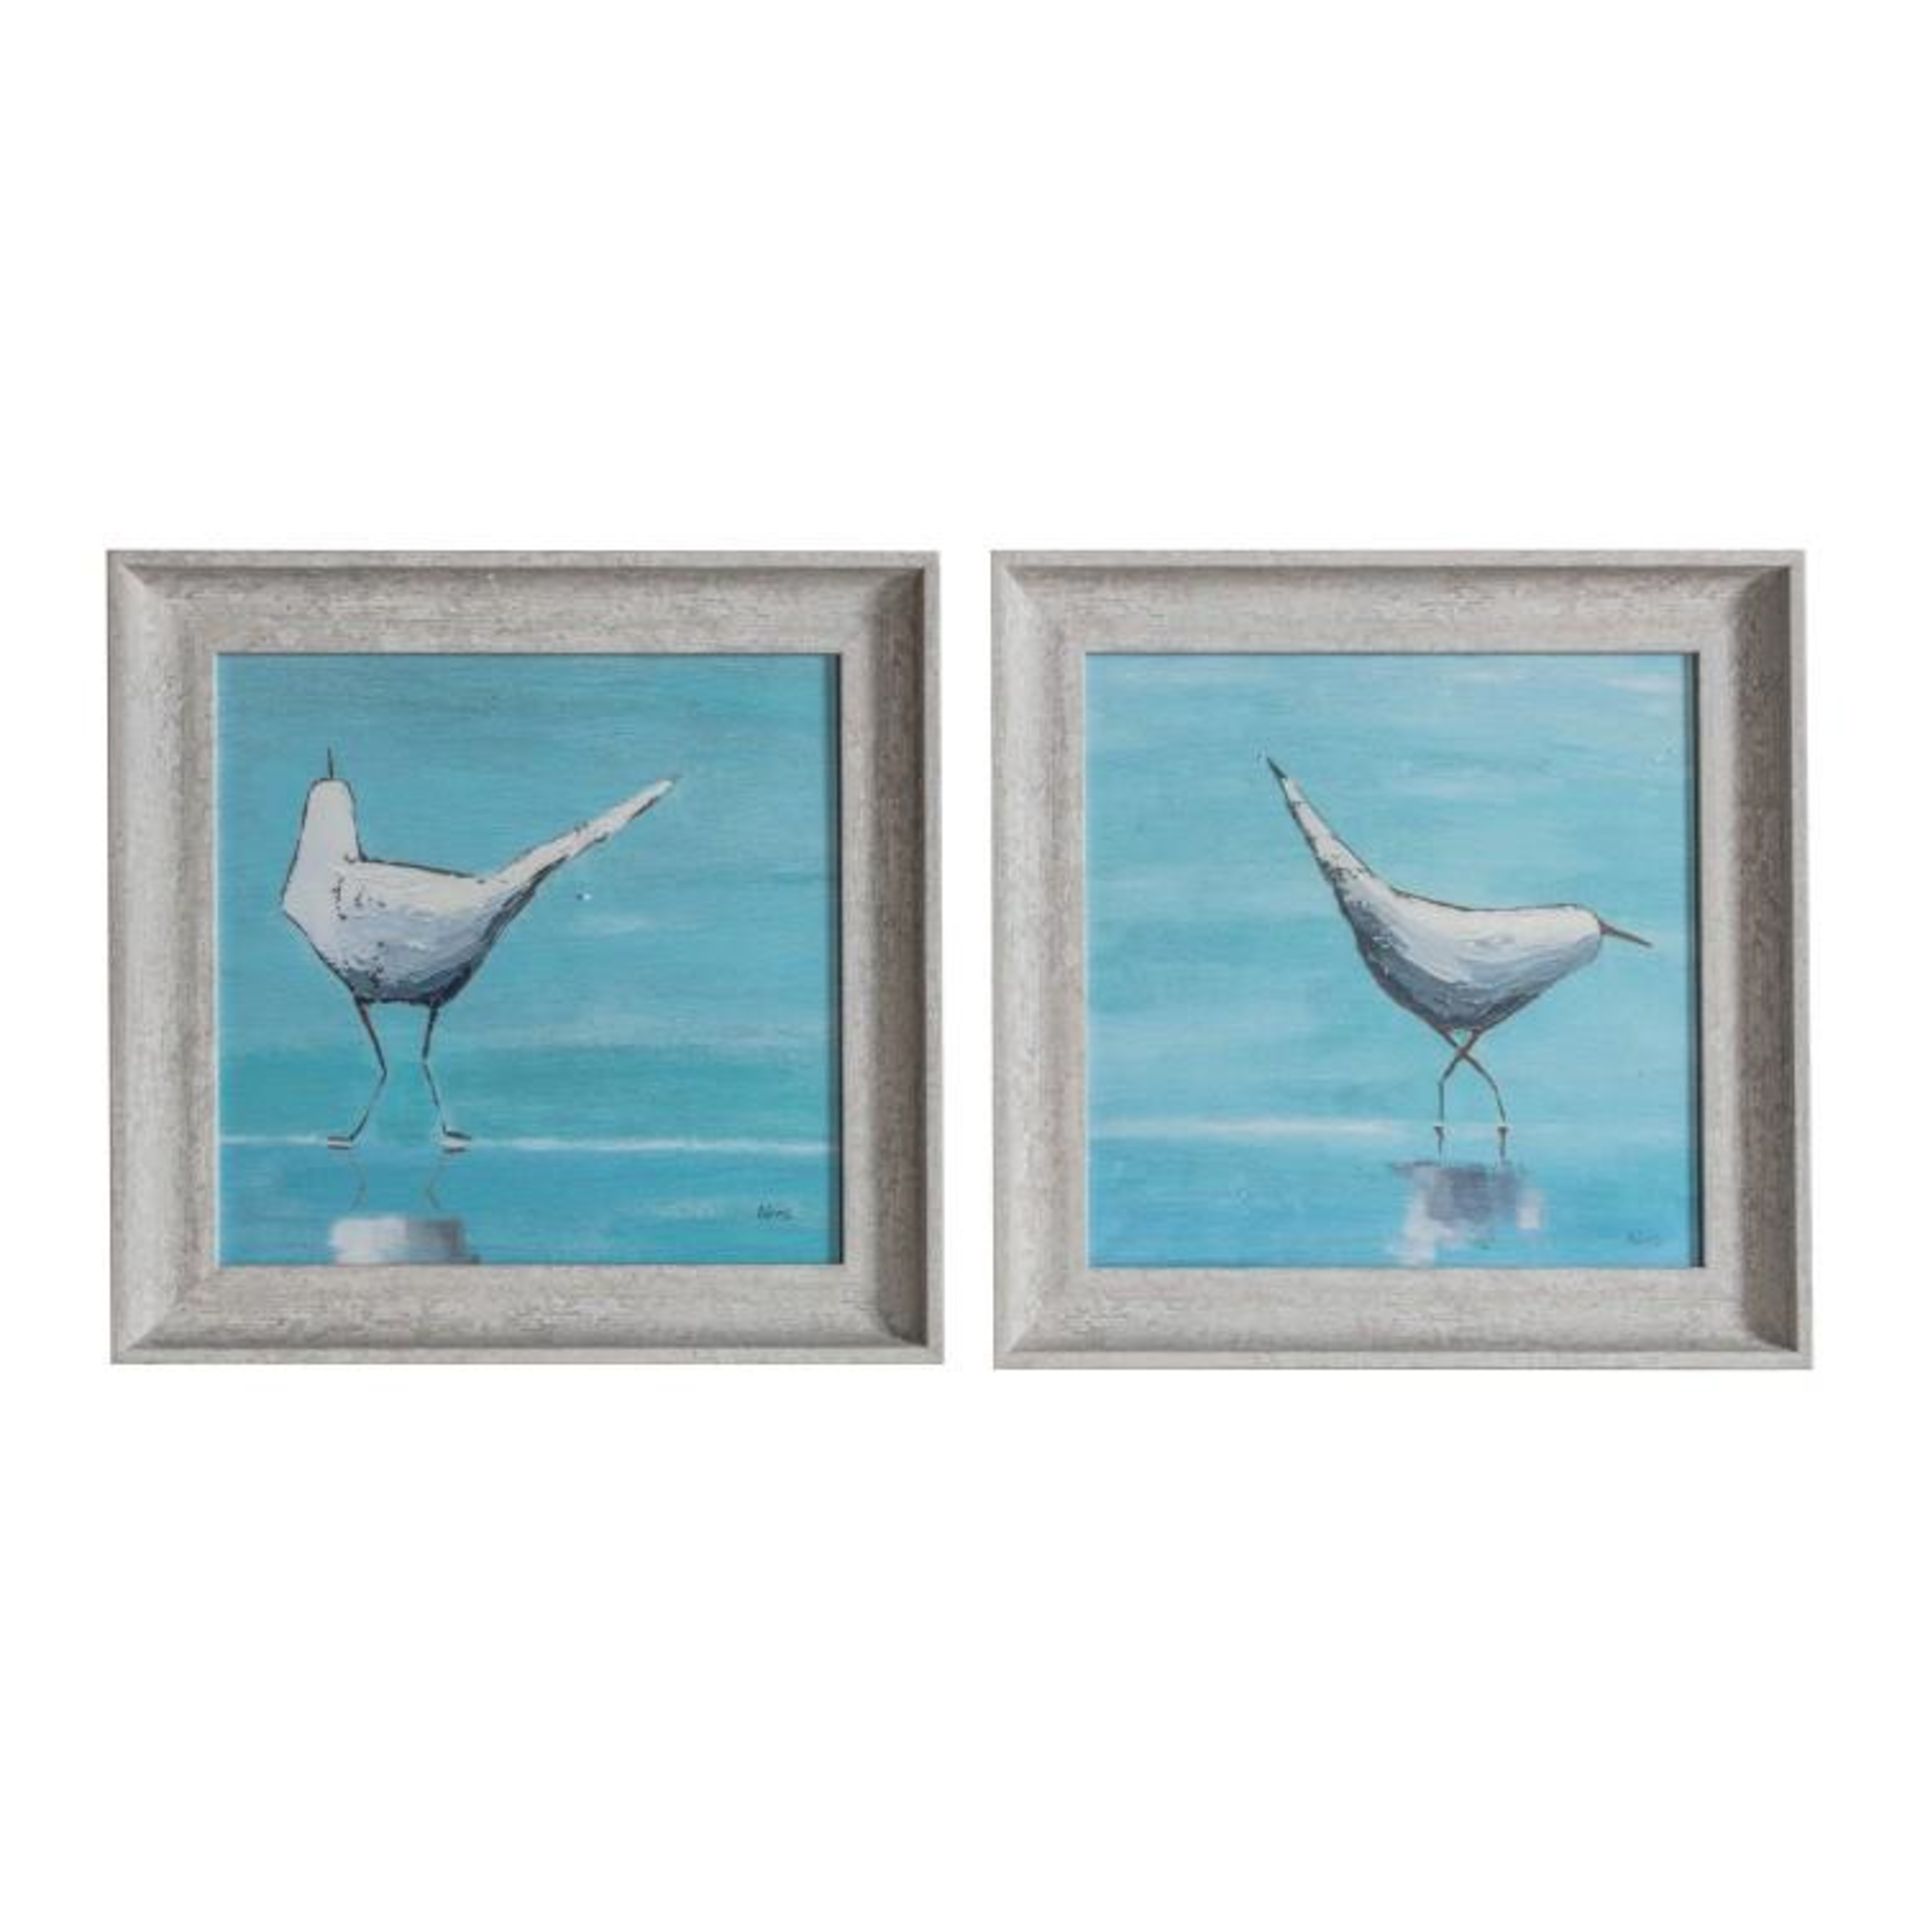 Curious Seagulls framed art Set of 2 380 x 35 x 380mm Add character to the home with the Curious